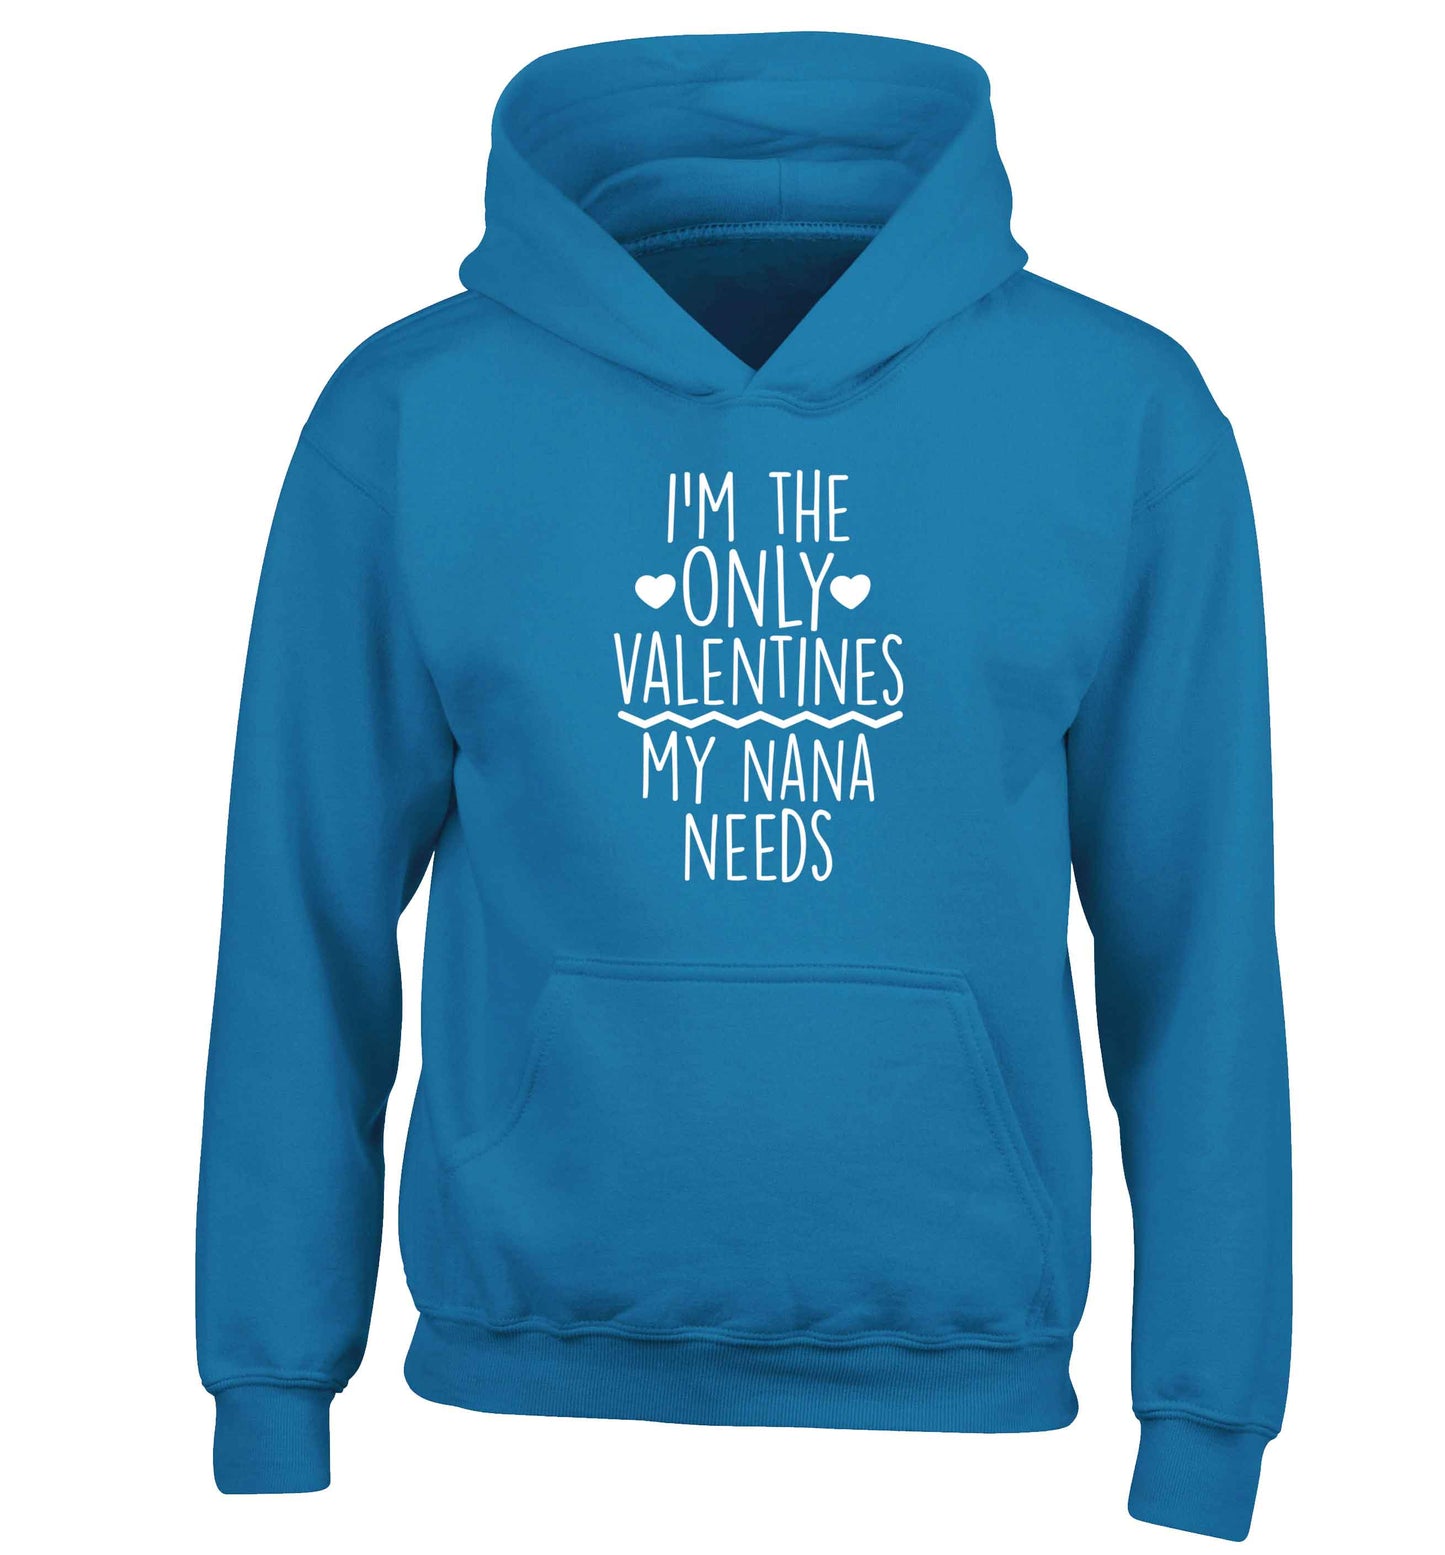 I'm the only valentines my nana needs children's blue hoodie 12-13 Years